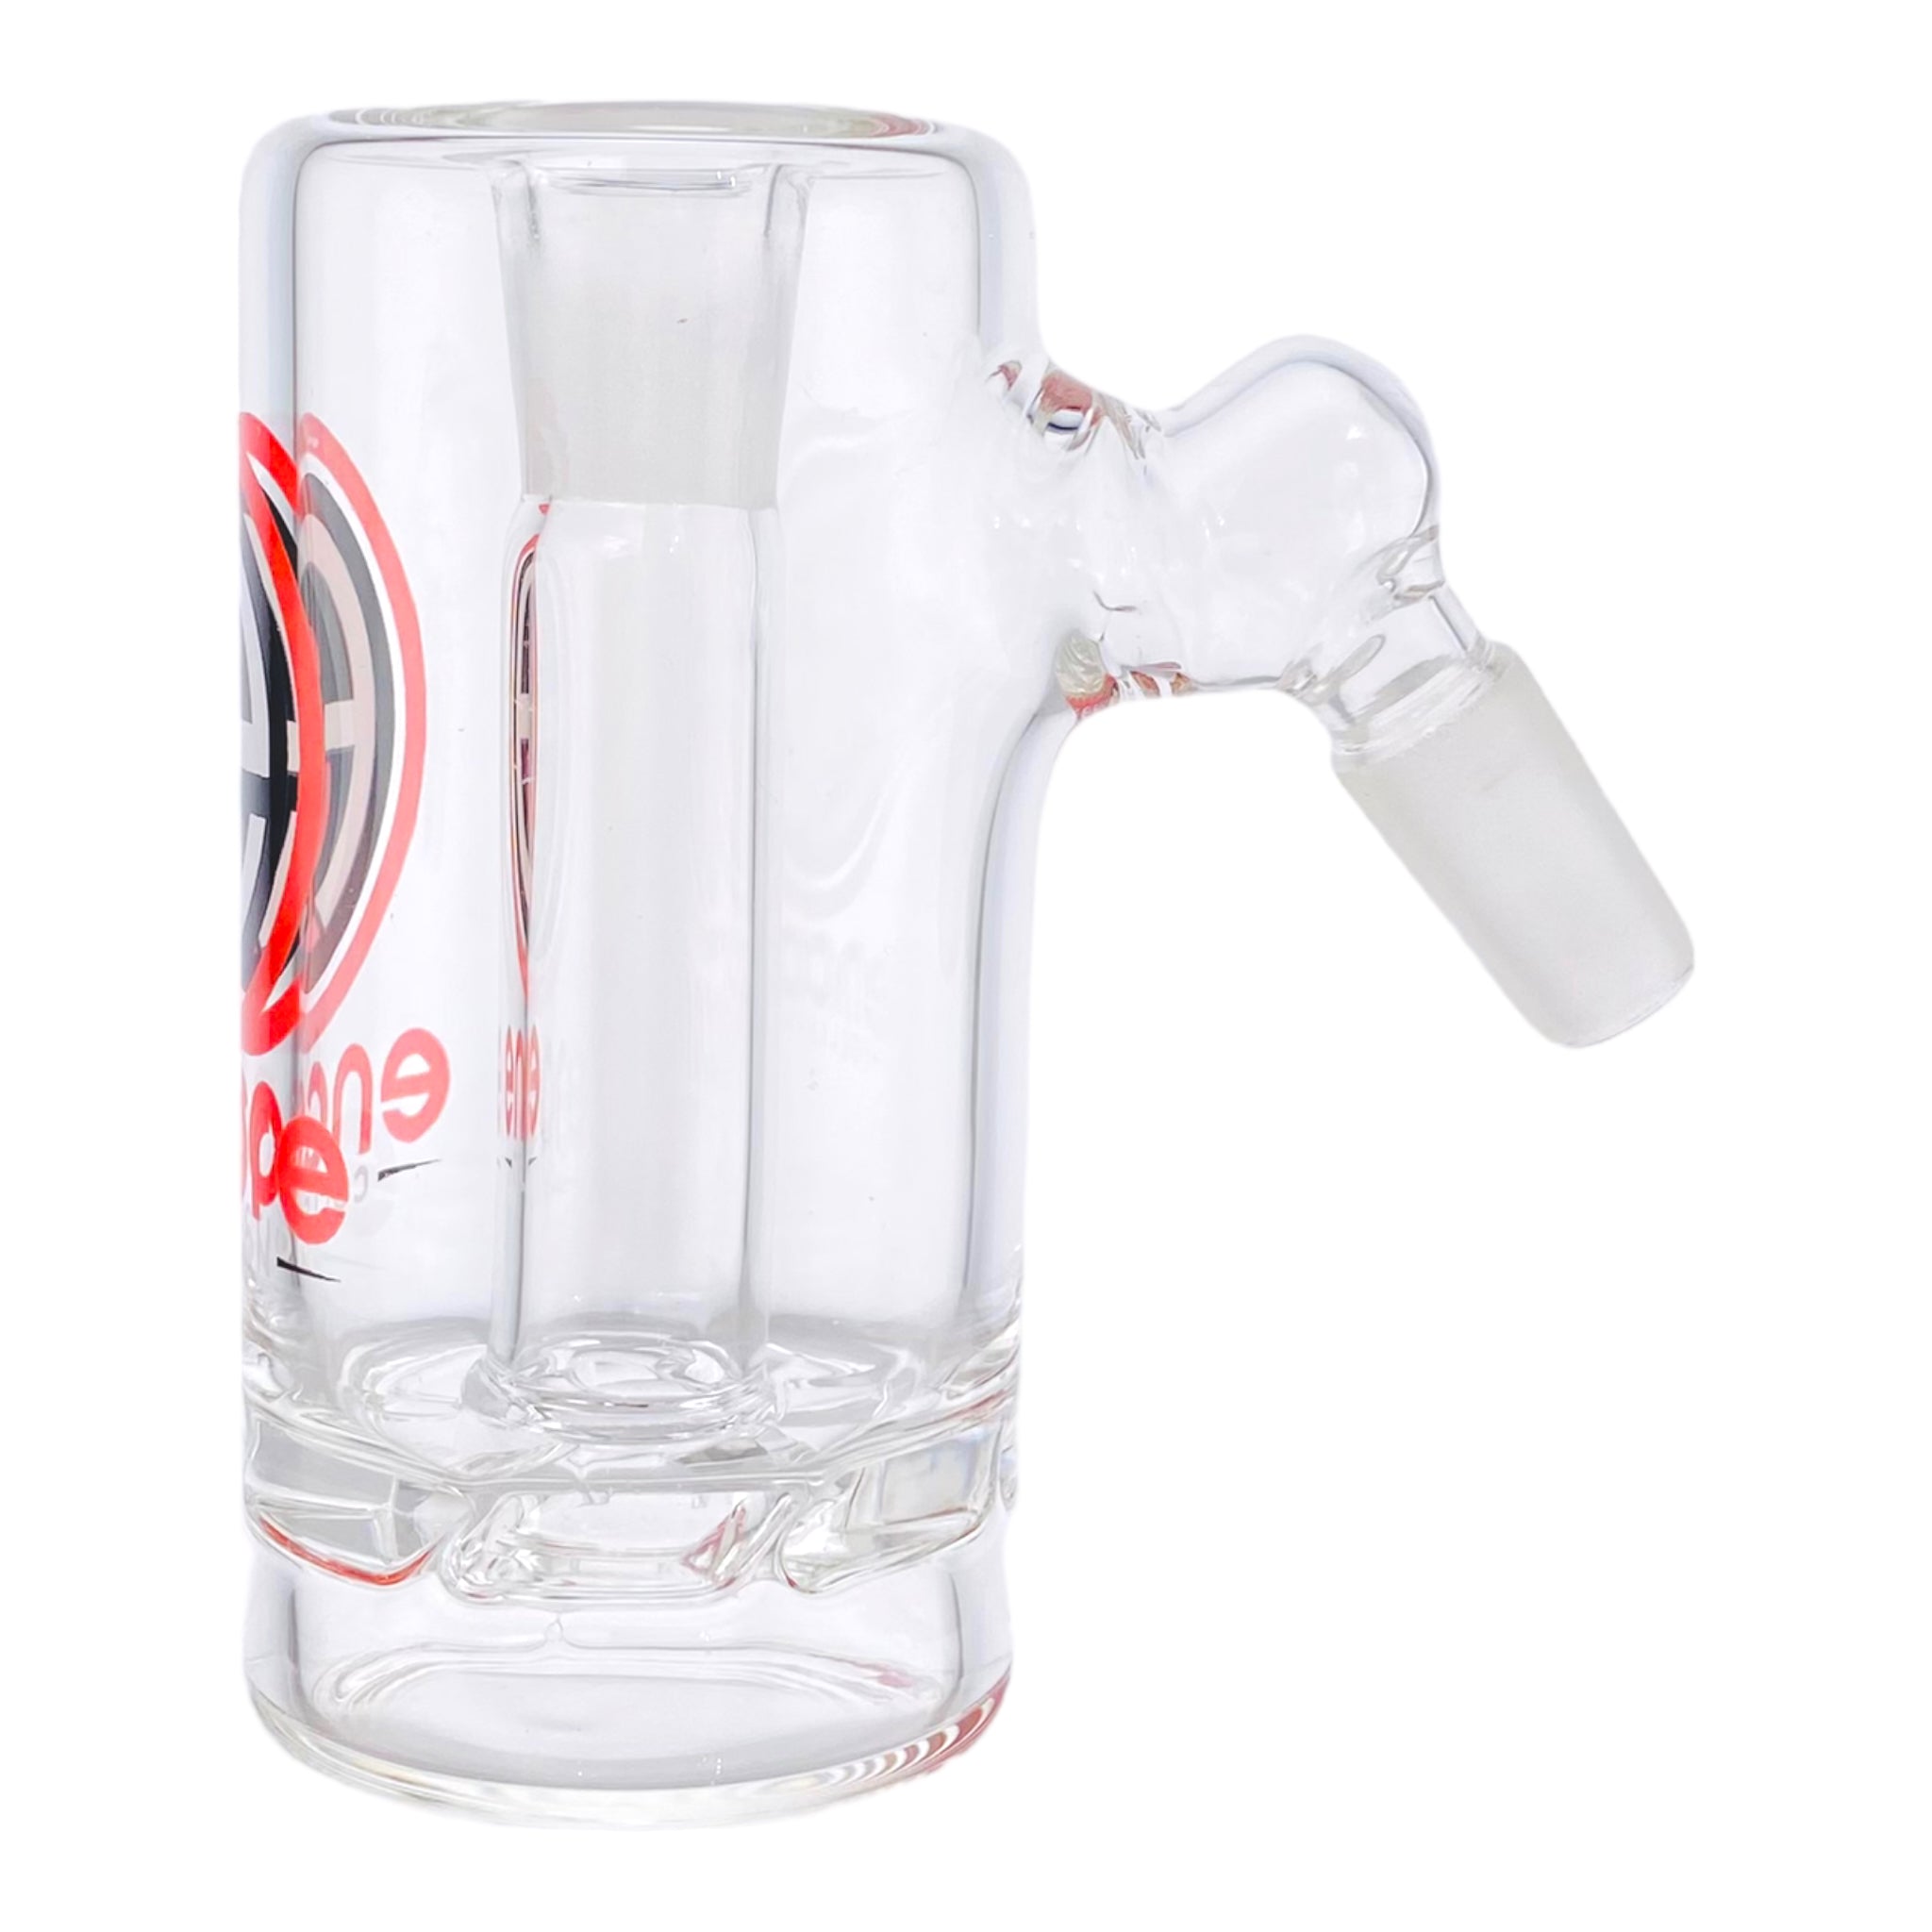 Encore Glass 14mm Ash Cathcer With 45 Degree Joint And Turbine Perc Red Logo